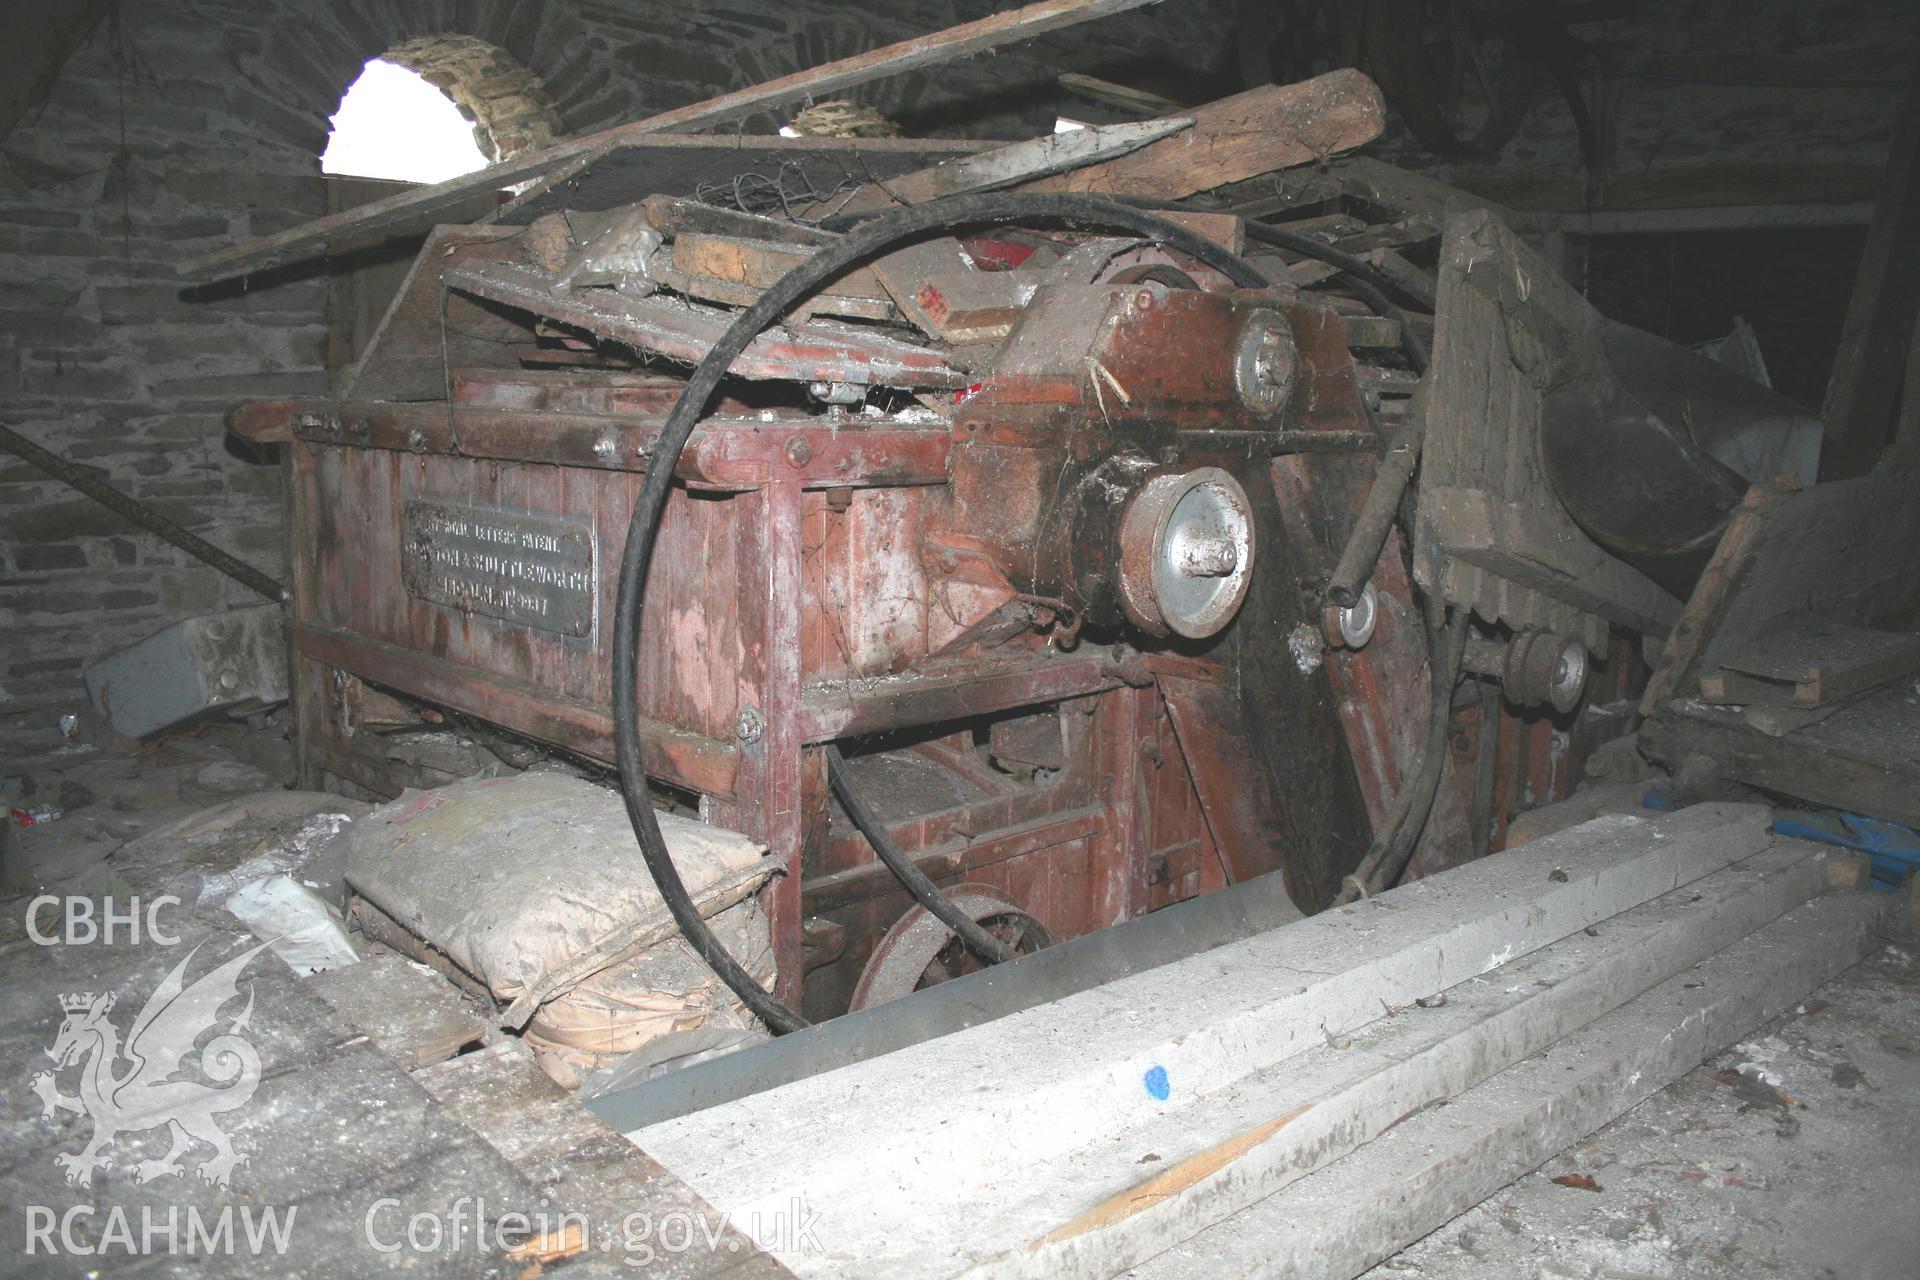 Interior view of threshing machine in threshing house. Photographic survey of the threshing machine in the threshing house at Tan-y-Graig Farm, Llanfarian. Conducted by Geoff Ward and John Wiles 11th December 2016.